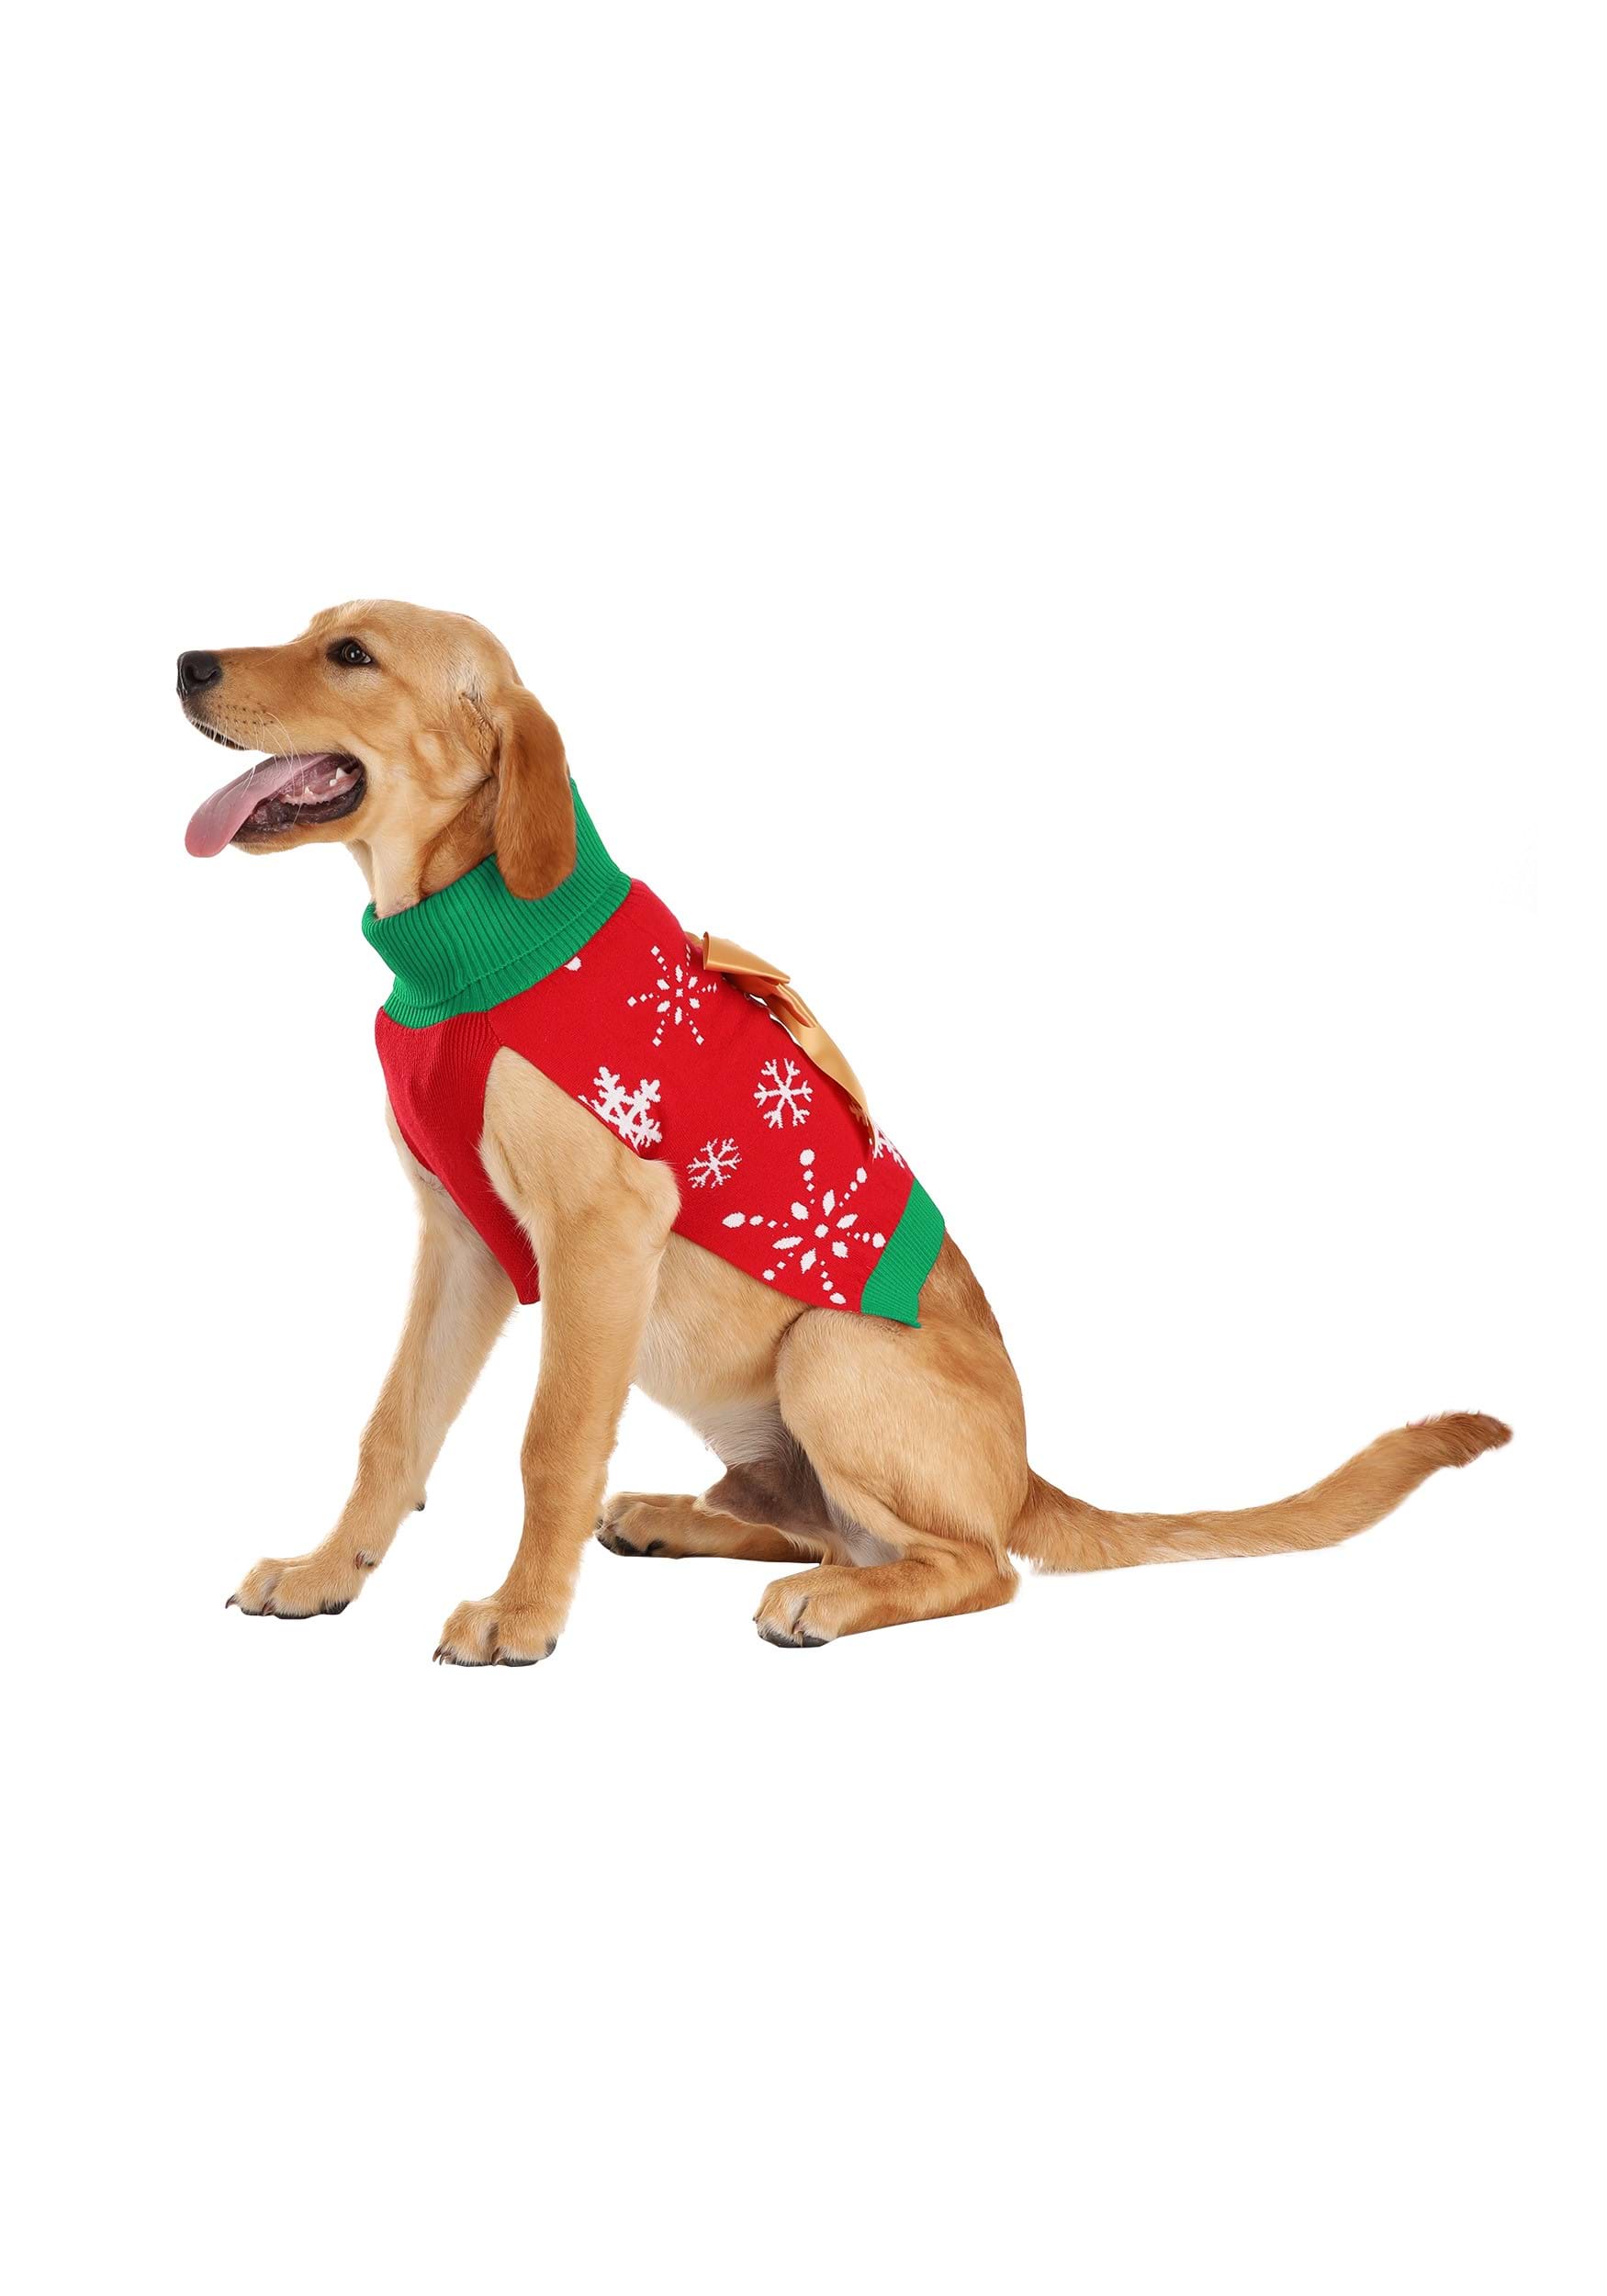 https://images.fun.com/products/83365/2-1-260100/christmas-present-dog-sweater-alt-6.jpg